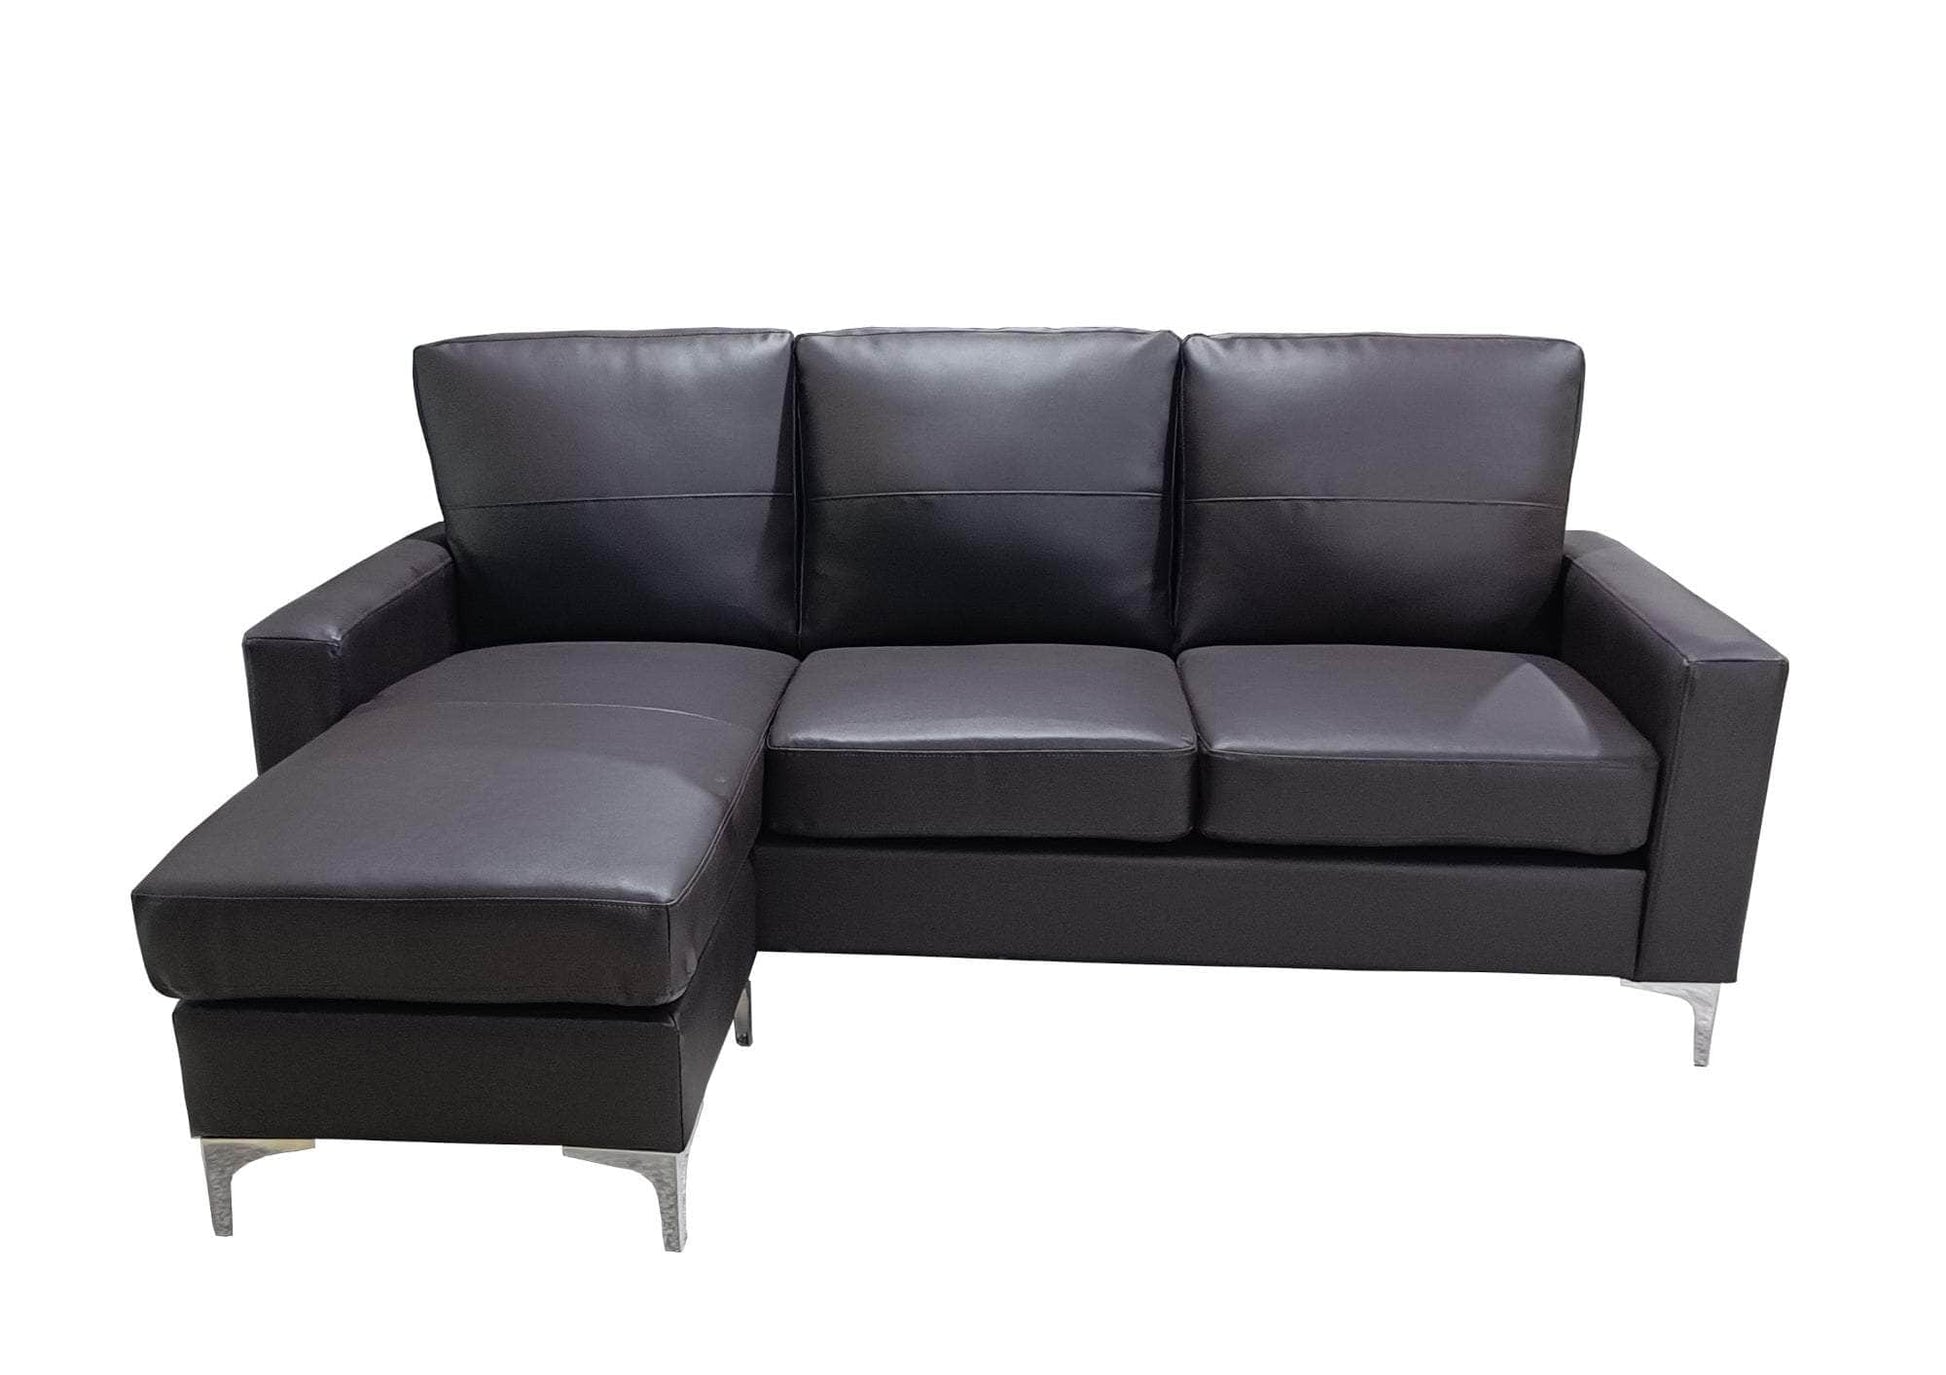 Urban Cali Sectional Brown Del Mar 78.74" Wide Faux Leather Sectional Sofa with Reversible Chaise - Available in 3 Colours